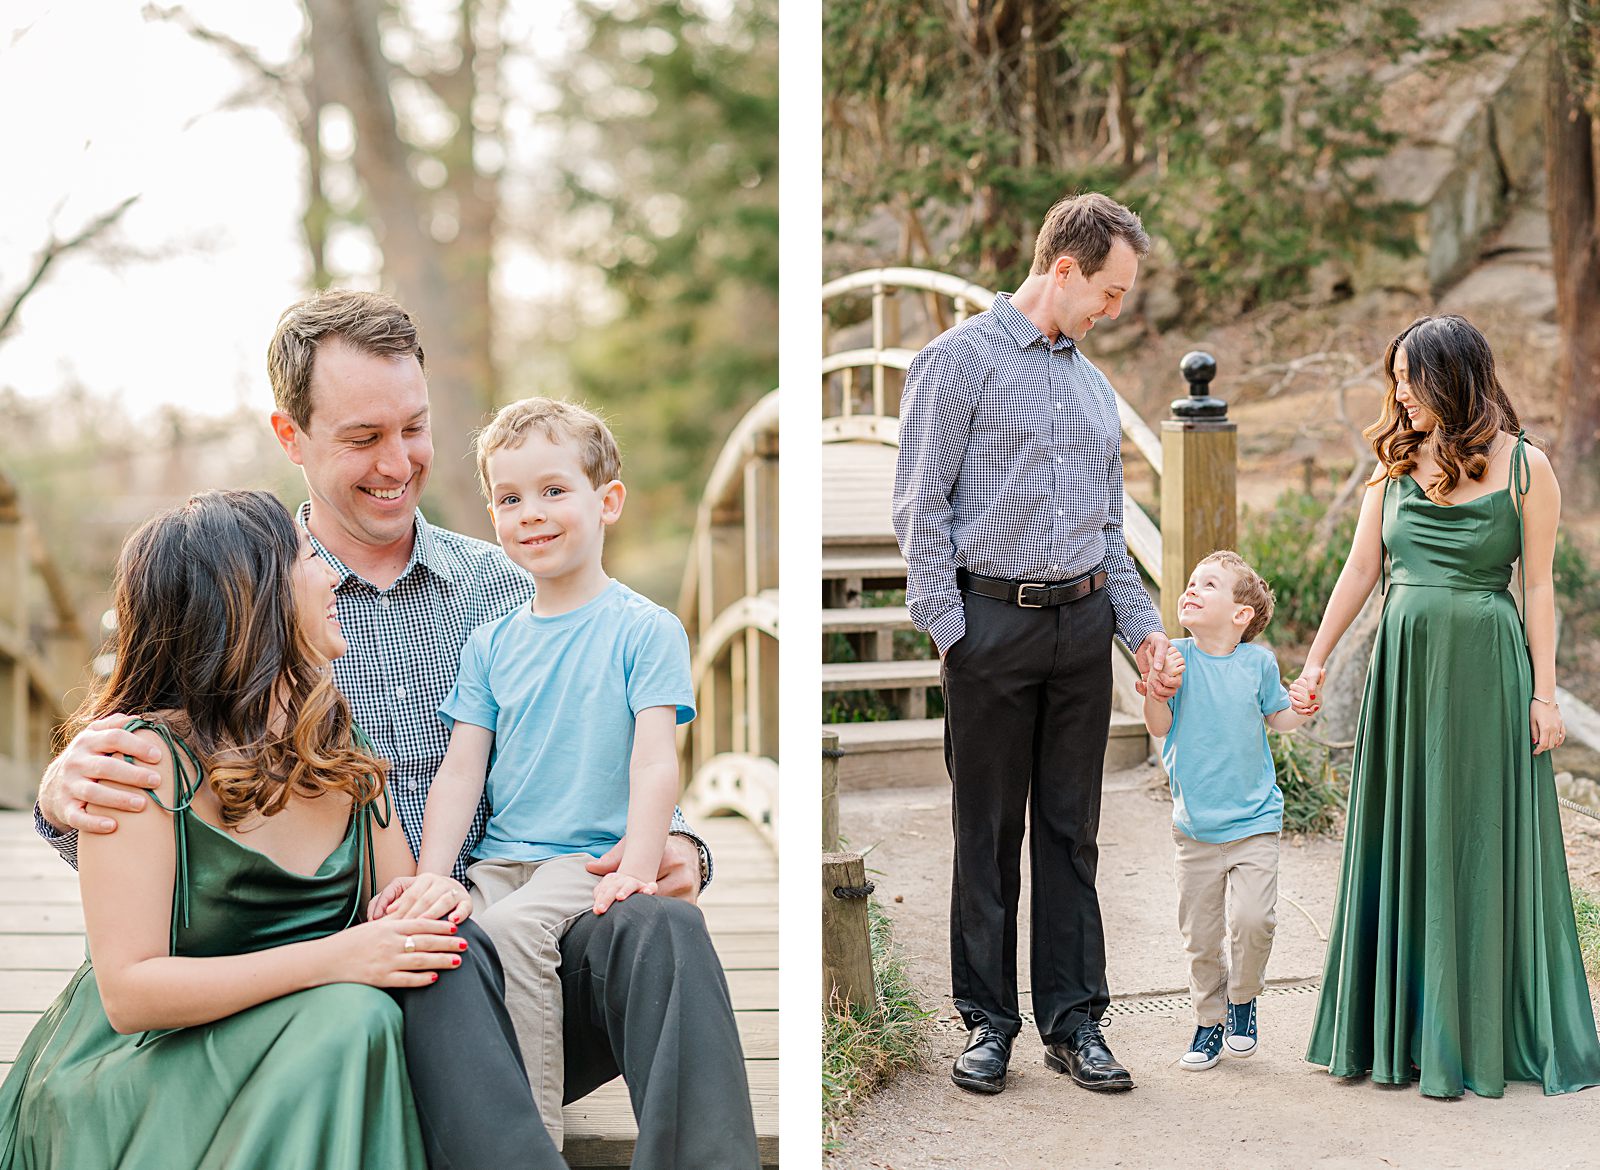 A Spring Maymont Engagement Session with a green dress by Virginia Wedding Photographer Kailey Brianne Photography. 